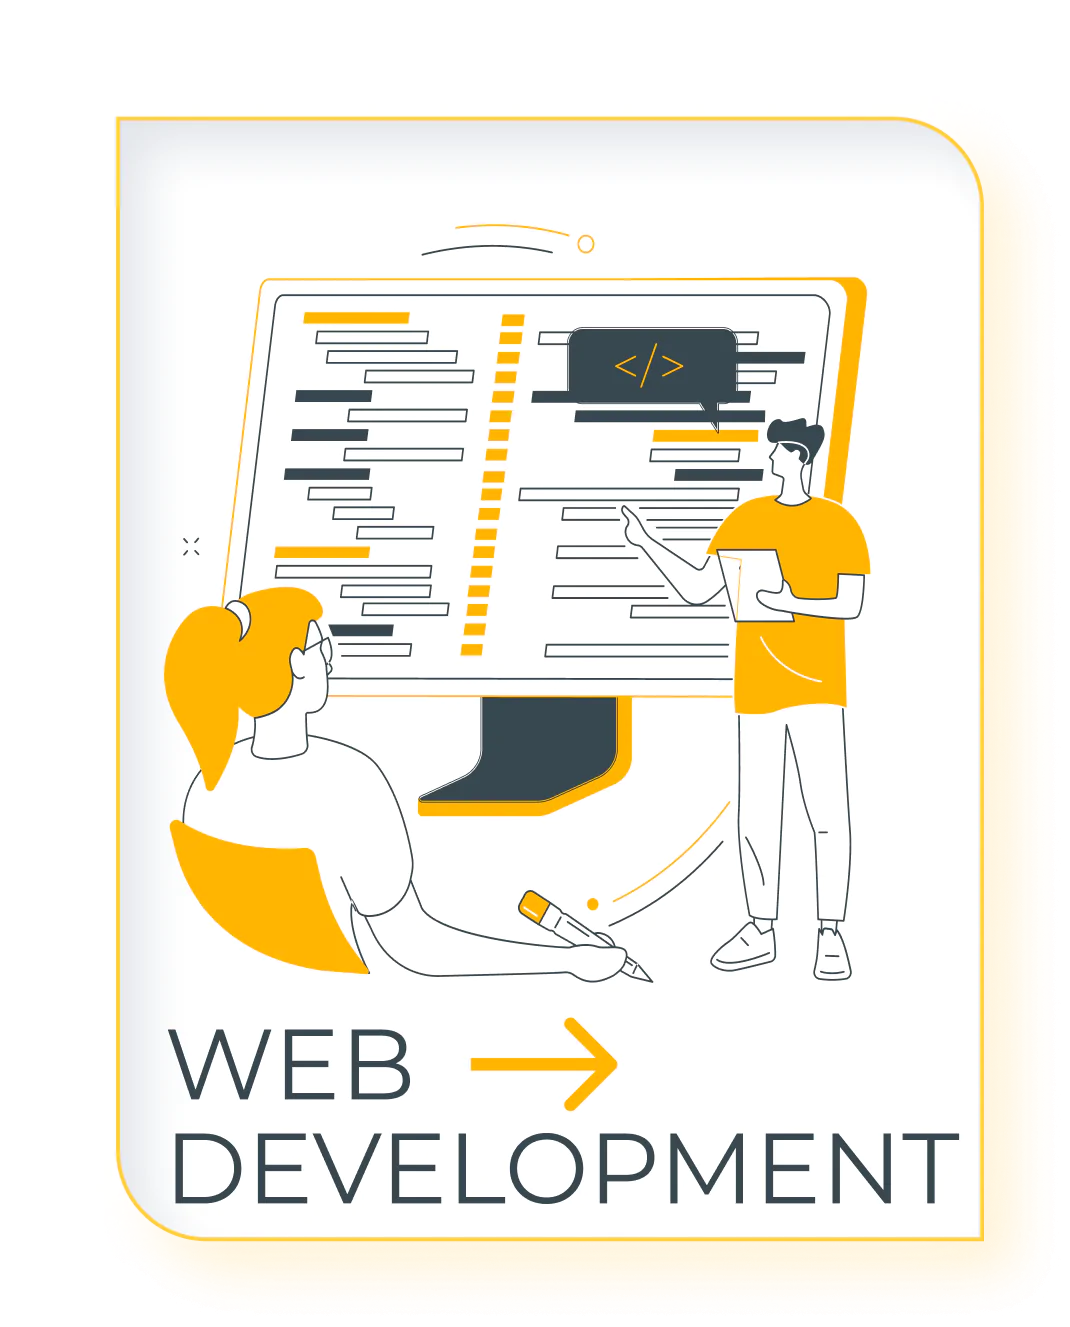 Your website is the cornerstone of your online presence. Our talented team of web developers specializes in creating stunning, responsive websites that captivate visitors and drive conversions. Whether you need a simple brochure site or a complex e-commerce platform, we have the expertise to deliver results.